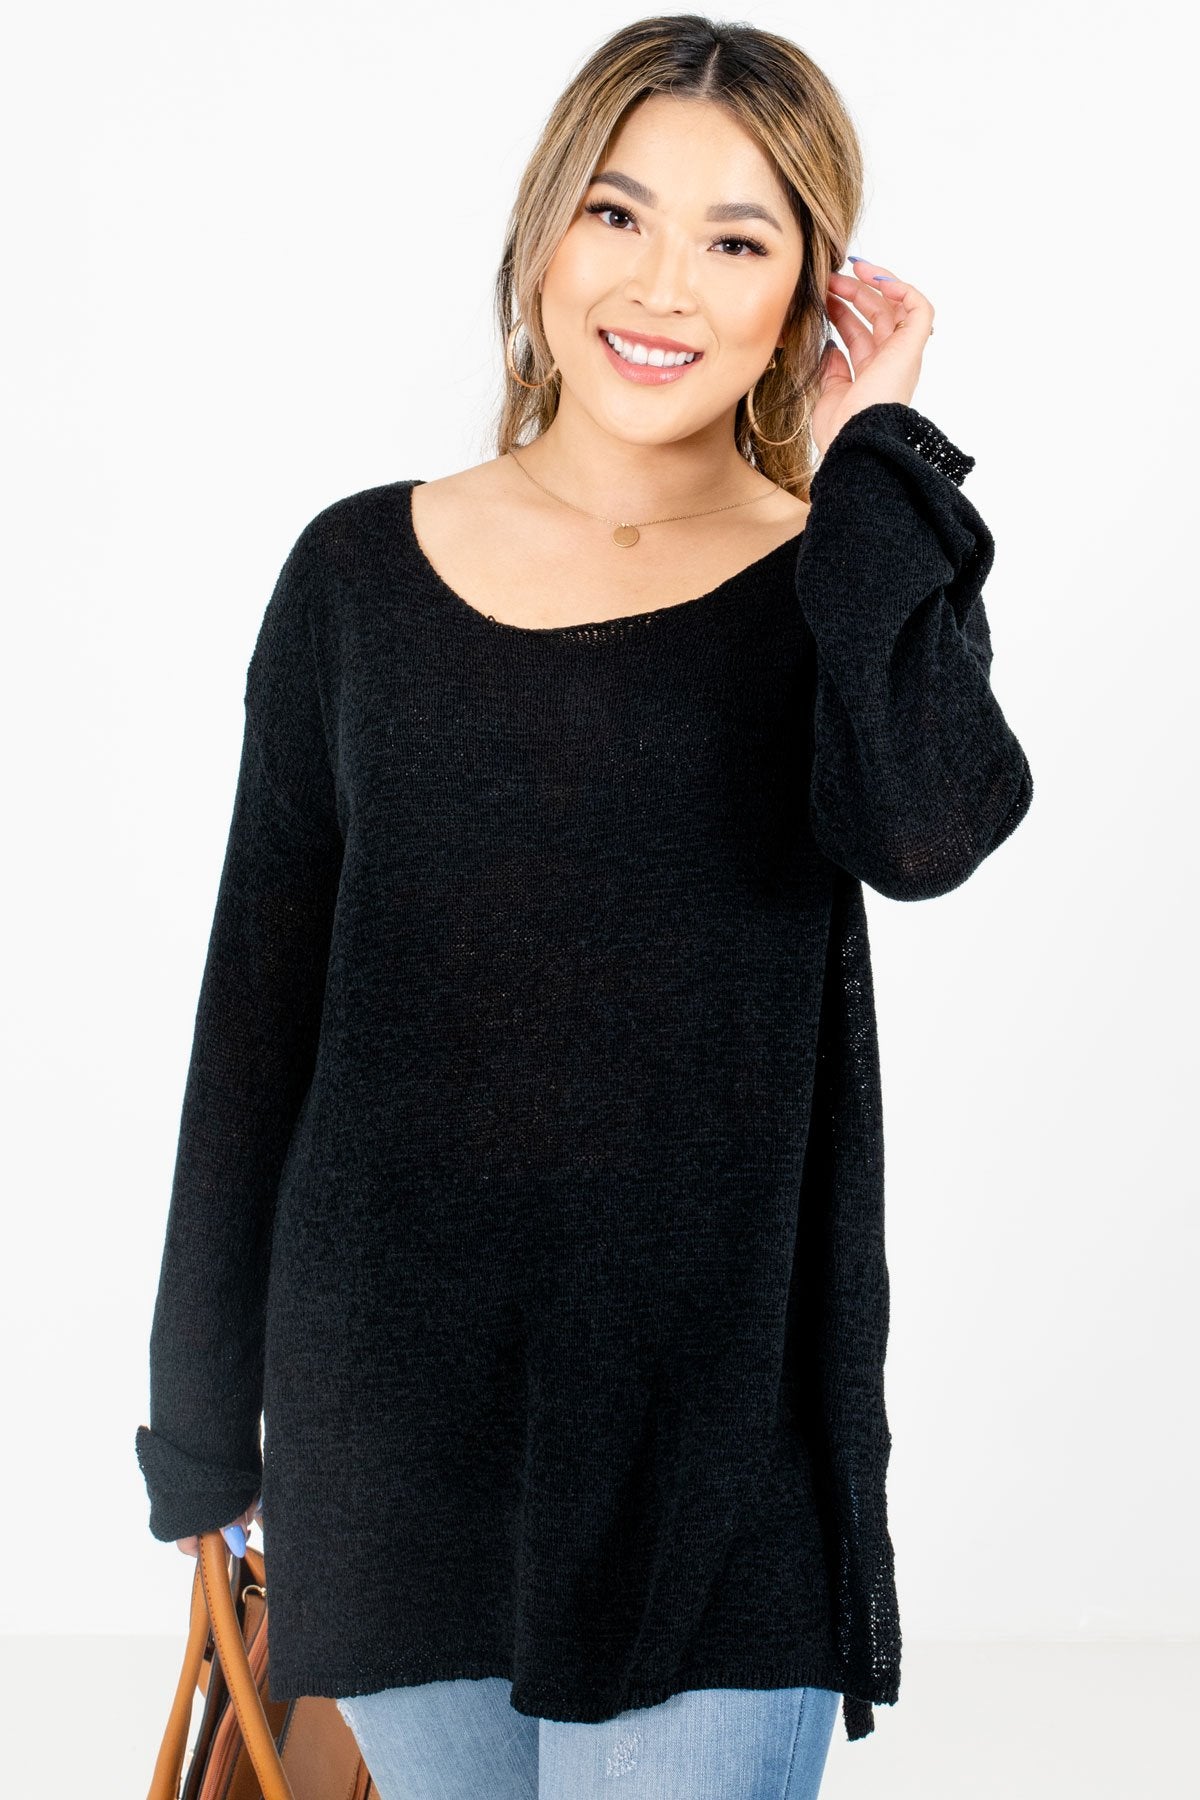 Black High-Quality Knit Material Boutique Sweaters for Women